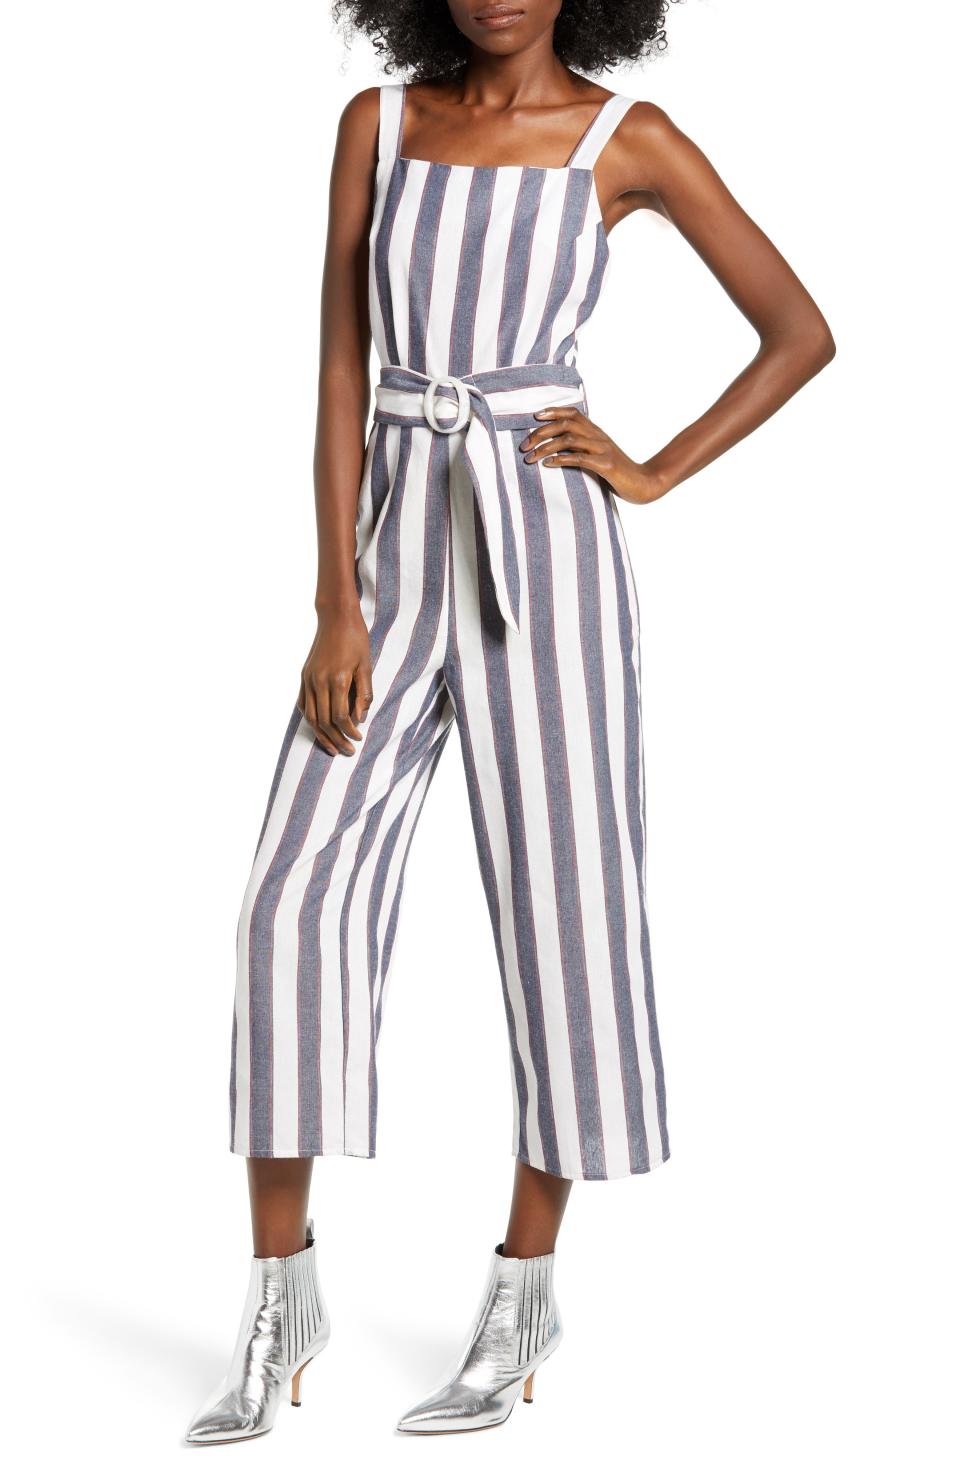 6) A Beachy Jumpsuit to Get You in the Mood for Summer